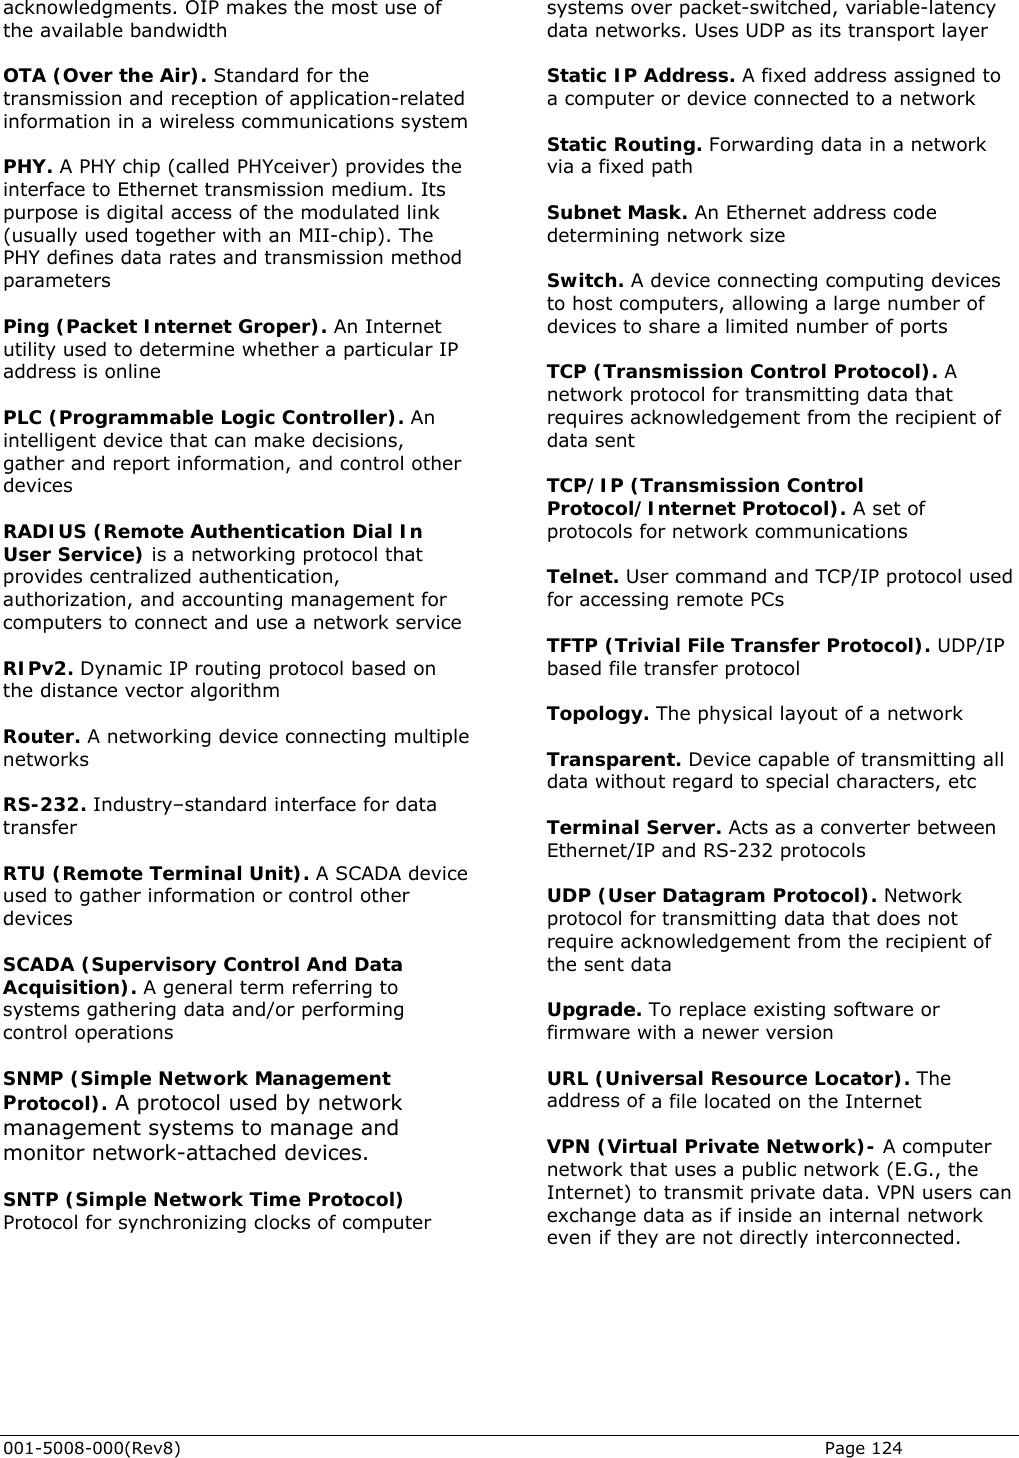  001-5008-000(Rev8)   Page 124 acknowledgments. OIP makes the most use othe available bandwidth  OTA (Over the Air). Standard for the   thernet transmission medium. Its urpose is digital access of the modulated link arameters  Internet tility used to determine whether a particular IP ogic Controller). An telligent device that can make decisions, her at uthorization, and accounting management for     algorithm TU (Remote Terminal Unit). A SCADA device orming ntrol operations ement rotocol). A protocol used by network twork-attached devices.   ver packet-switched, variable-latency orks. Uses UDP as its transport layer  Static IP Address. A fixed address assigned to  computer or device connected to a network ork ubnet Mask. An Ethernet address code witch. A device connecting computing devices ansmission Control Protocol). A etwork protocol for transmitting data that or network communications col used er Protocol). UDP/IP ased file transfer protocol ransparent. Device capable of transmitting all Acts as a converter between thernet/IP and RS-232 protocols rk itting data that does not quire acknowledgement from the recipient of pgrade. To replace existing software or f a file located on the Internet er e can xchange data as if inside an internal network  f  systems otransmission and reception of application-relatedinformation in a wireless communications system PHY. A PHY chip (called PHYceiver) provides the interface to Ep(usually used together with an MII-chip). The PHY defines data rates and transmission method p Ping (Packet Internet Groper). Anuaddress is online  PLC (Programmable Lingather and report information, and control otdevices  RADIUS (Remote Authentication Dial In User Service) is a networking protocol thprovides centralized authentication, acomputers to connect and use a network service RIPv2. Dynamic IP routing protocol based onthe distance vector Router. A networking device connecting multiple networks   RS-232. Industry–standard interface for data transfer  Rused to gather information or control other devices  SCADA (Supervisory Control And Data Acquisition). A general term referring to systems gathering data and/or perfco SNMP (Simple Network ManagPmanagement systems to manage and monitor ne SNTP (Simple Network Time Protocol)Protocol for synchronizing clocks of computer data netwa Static Routing. Forwarding data in a netwvia a fixed path  Sdetermining network size   Sto host computers, allowing a large number of devices to share a limited number of ports   TCP (Trnrequires acknowledgement from the recipient of data sent  TCP/IP (Transmission Control Protocol/Internet Protocol). A set of protocols f Telnet. User command and TCP/IP protofor accessing remote PCs  TFTP (Trivial File Transfb Topology. The physical layout of a network  Tdata without regard to special characters, etc  Terminal Server. E UDP (User Datagram Protocol). Netwoprotocol for transmrethe sent data   Ufirmware with a newer version  URL (Universal Resource Locator). The address o VPN (Virtual Private Network)- A computnetwork that uses a public network (E.G., thInternet) to transmit private data. VPN users eeven if they are not directly interconnected.                 